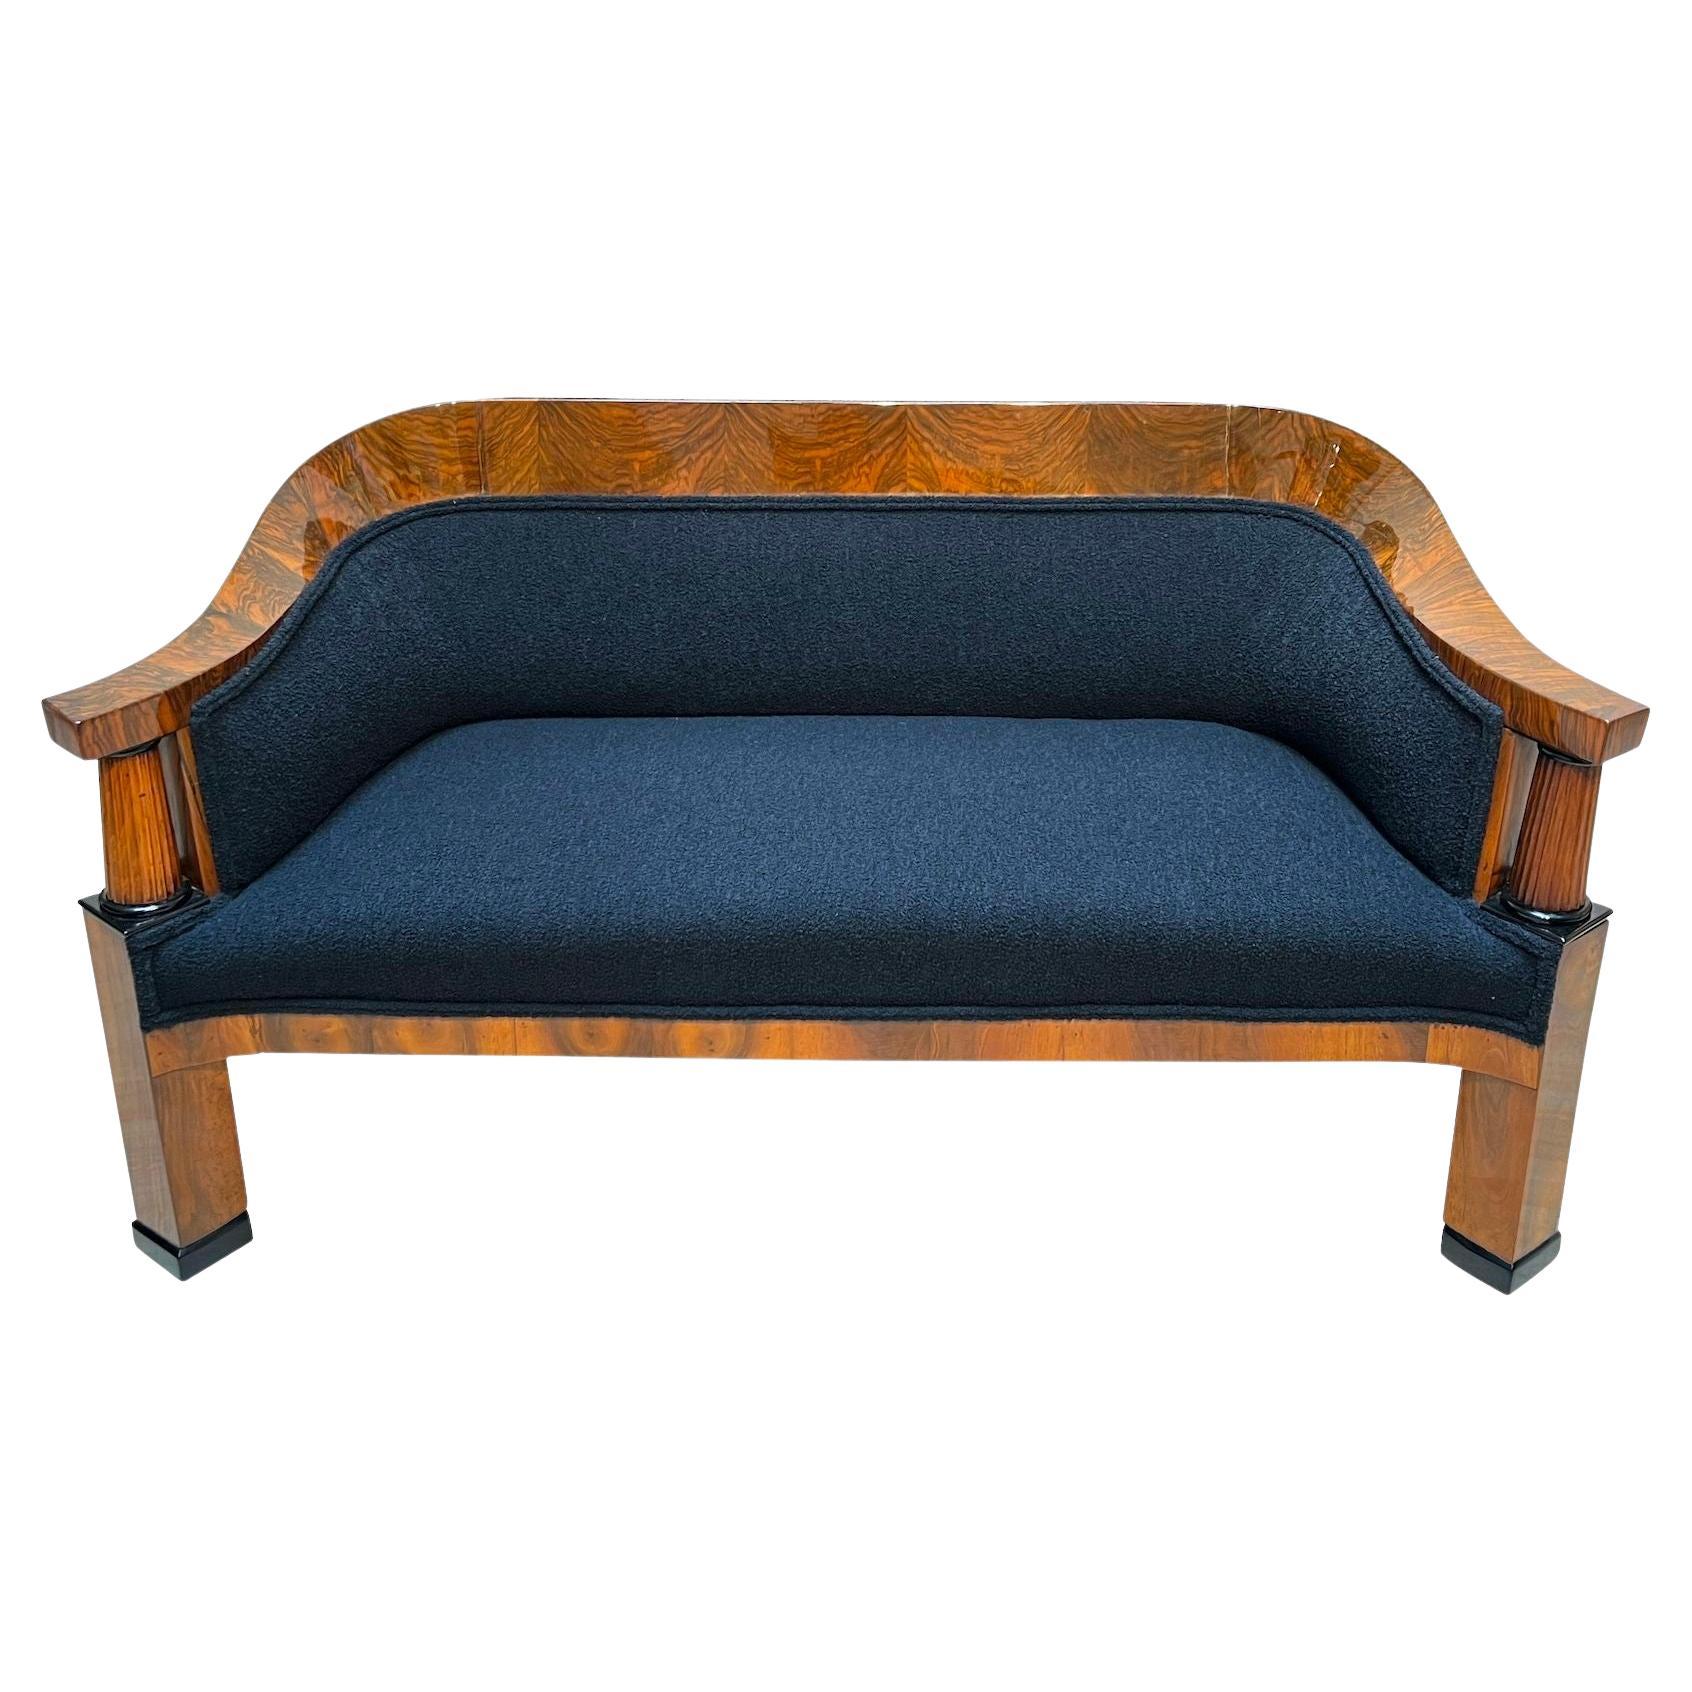 Beautiful neoclassical Biedermeier Sofa from Vienna, Austria circa 1825.
Walnut veneered and solid walnut. Two fluted full columns in beech with ebonized capitals and bases.Newly covered with black teddy (Bouclé) fabric and double keder. The